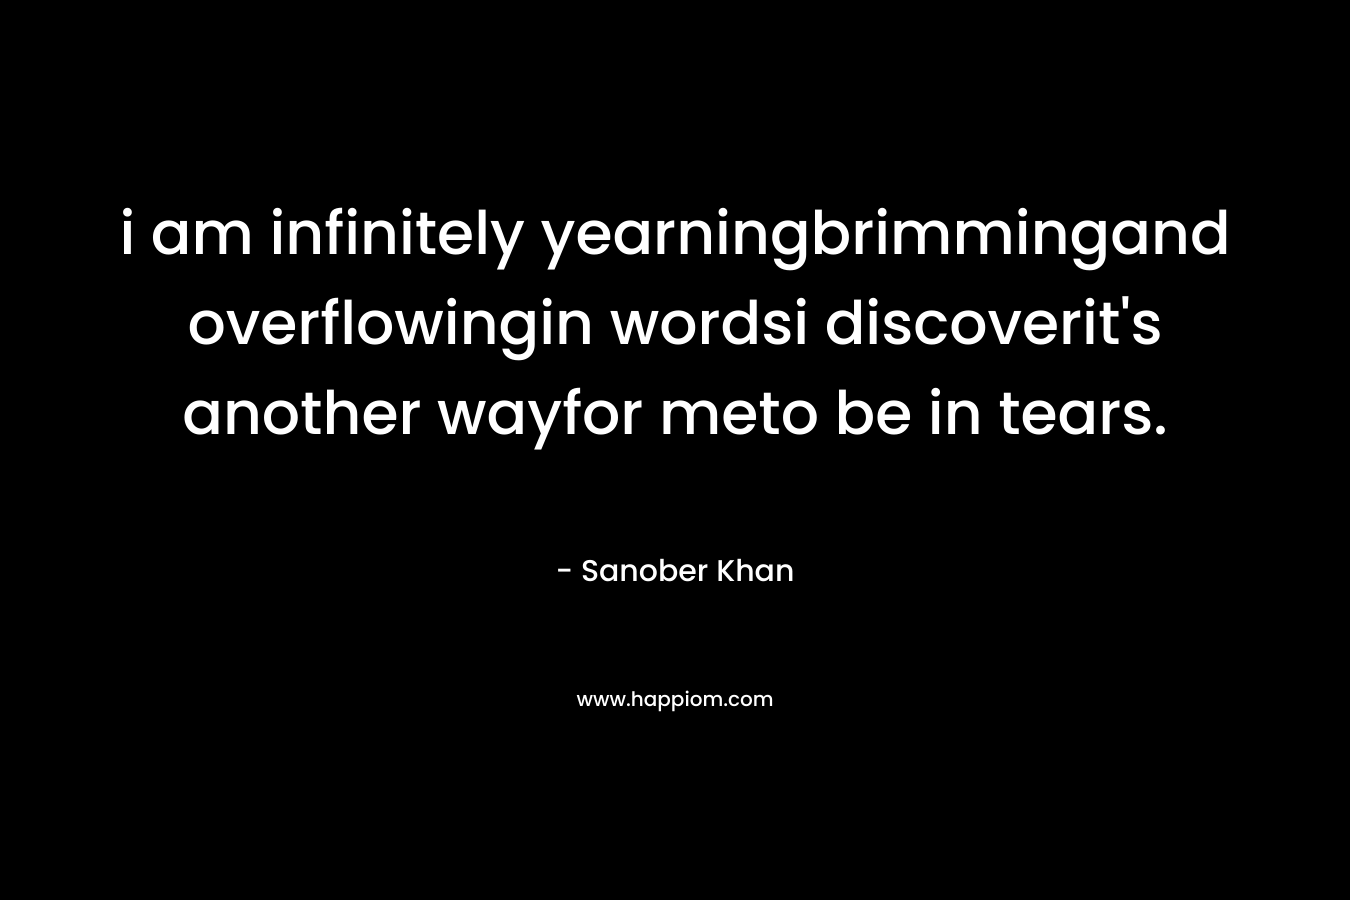 i am infinitely yearningbrimmingand overflowingin wordsi discoverit's another wayfor meto be in tears.